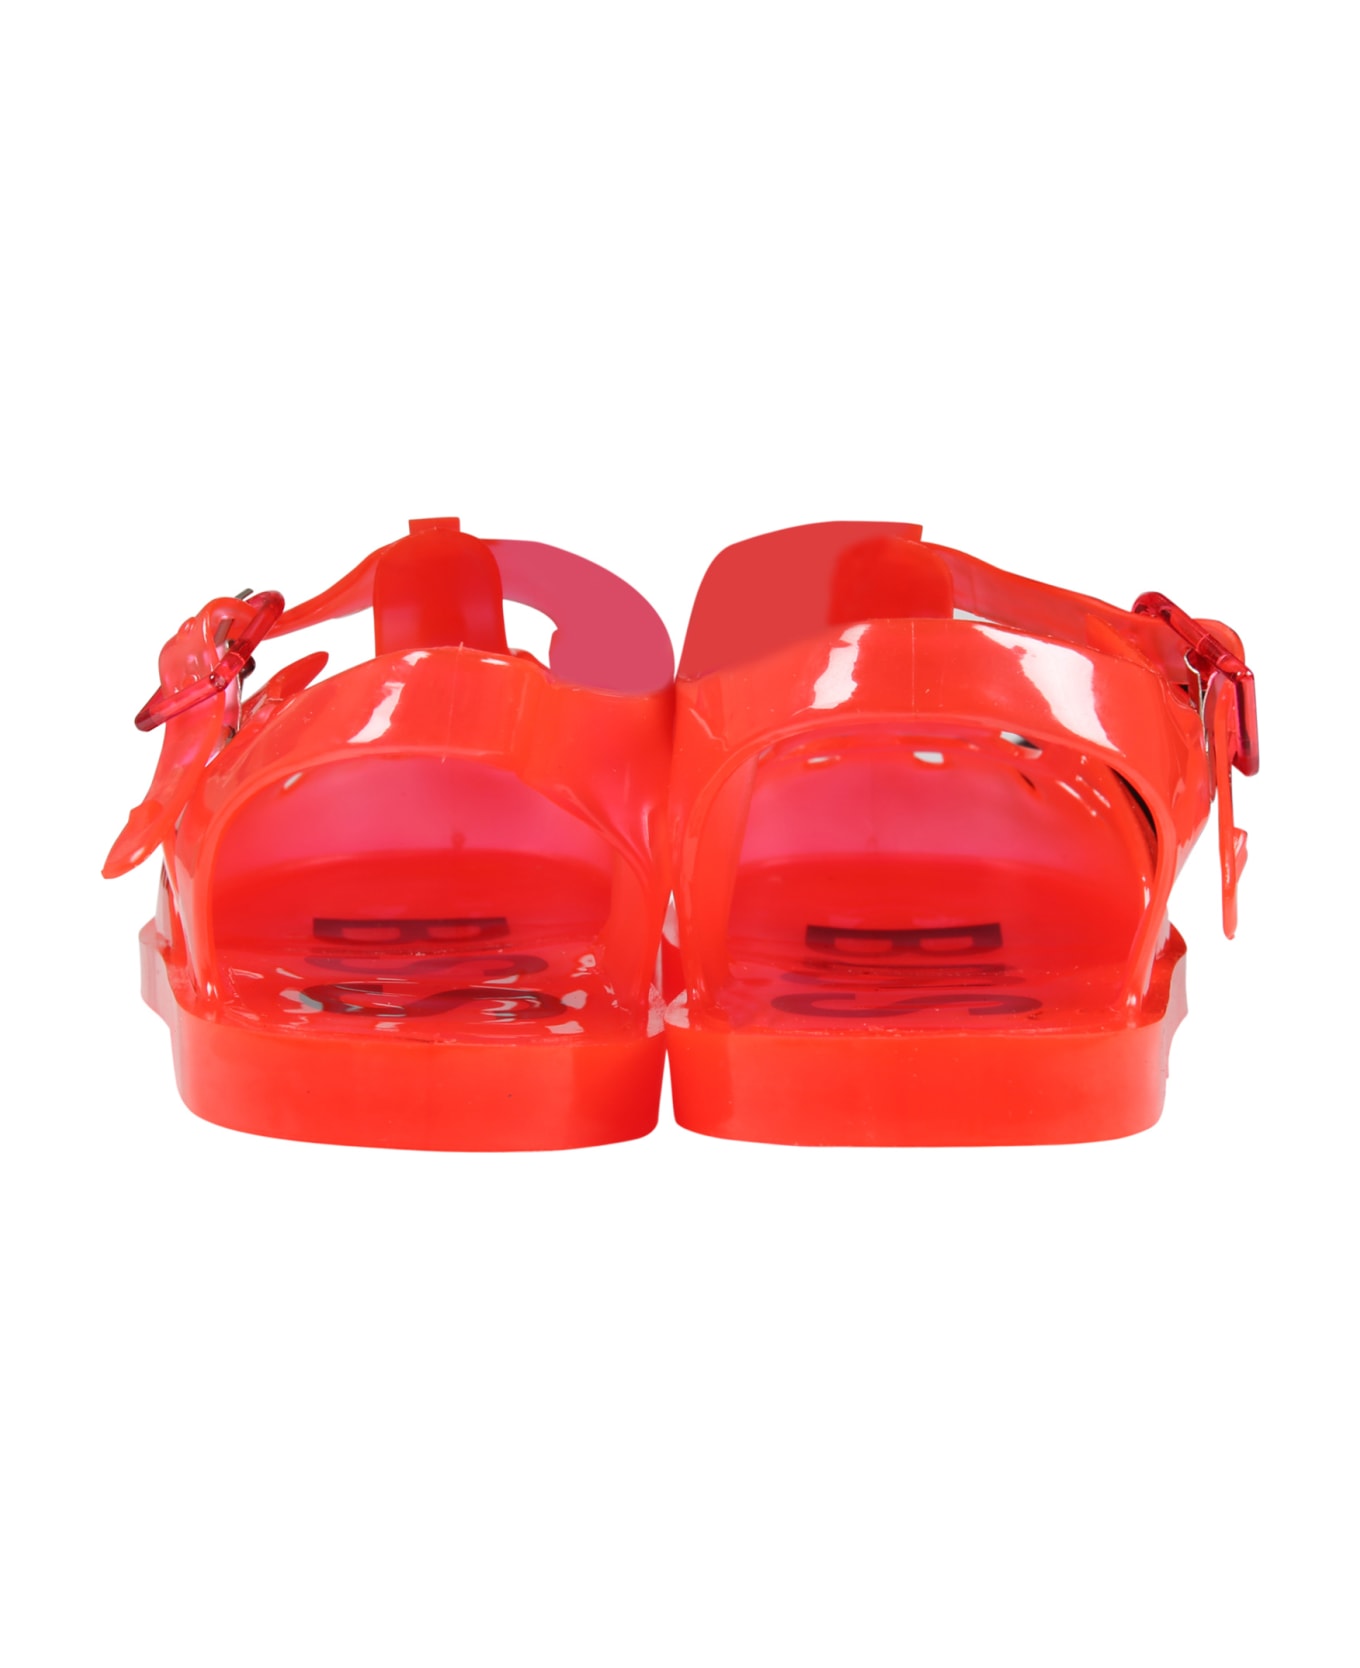 Hugo Boss Red Sandals For Boy - Red